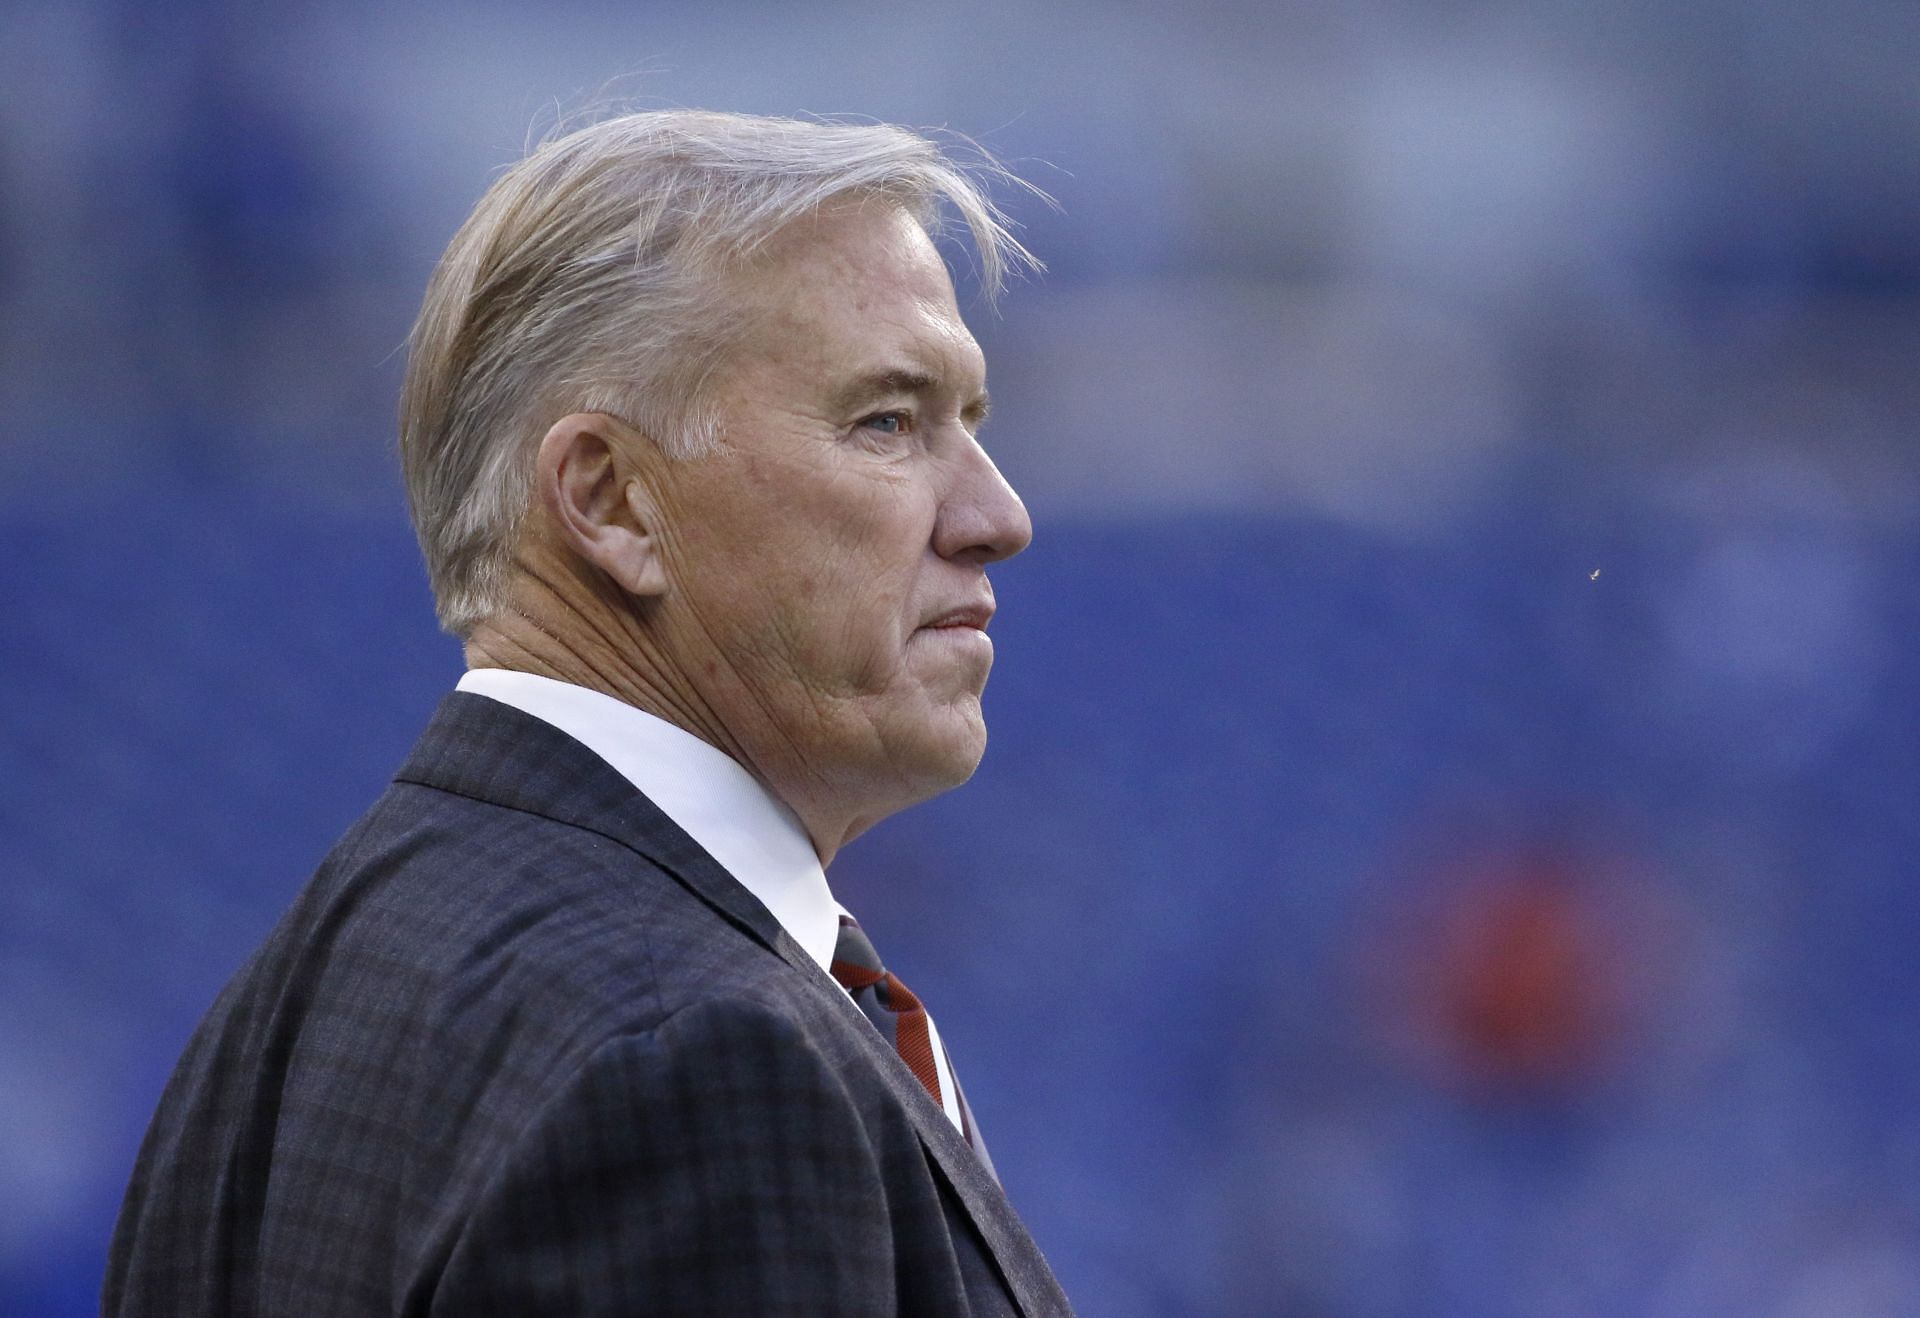 After leaving ASU, Jack Elway quits football, forges own path